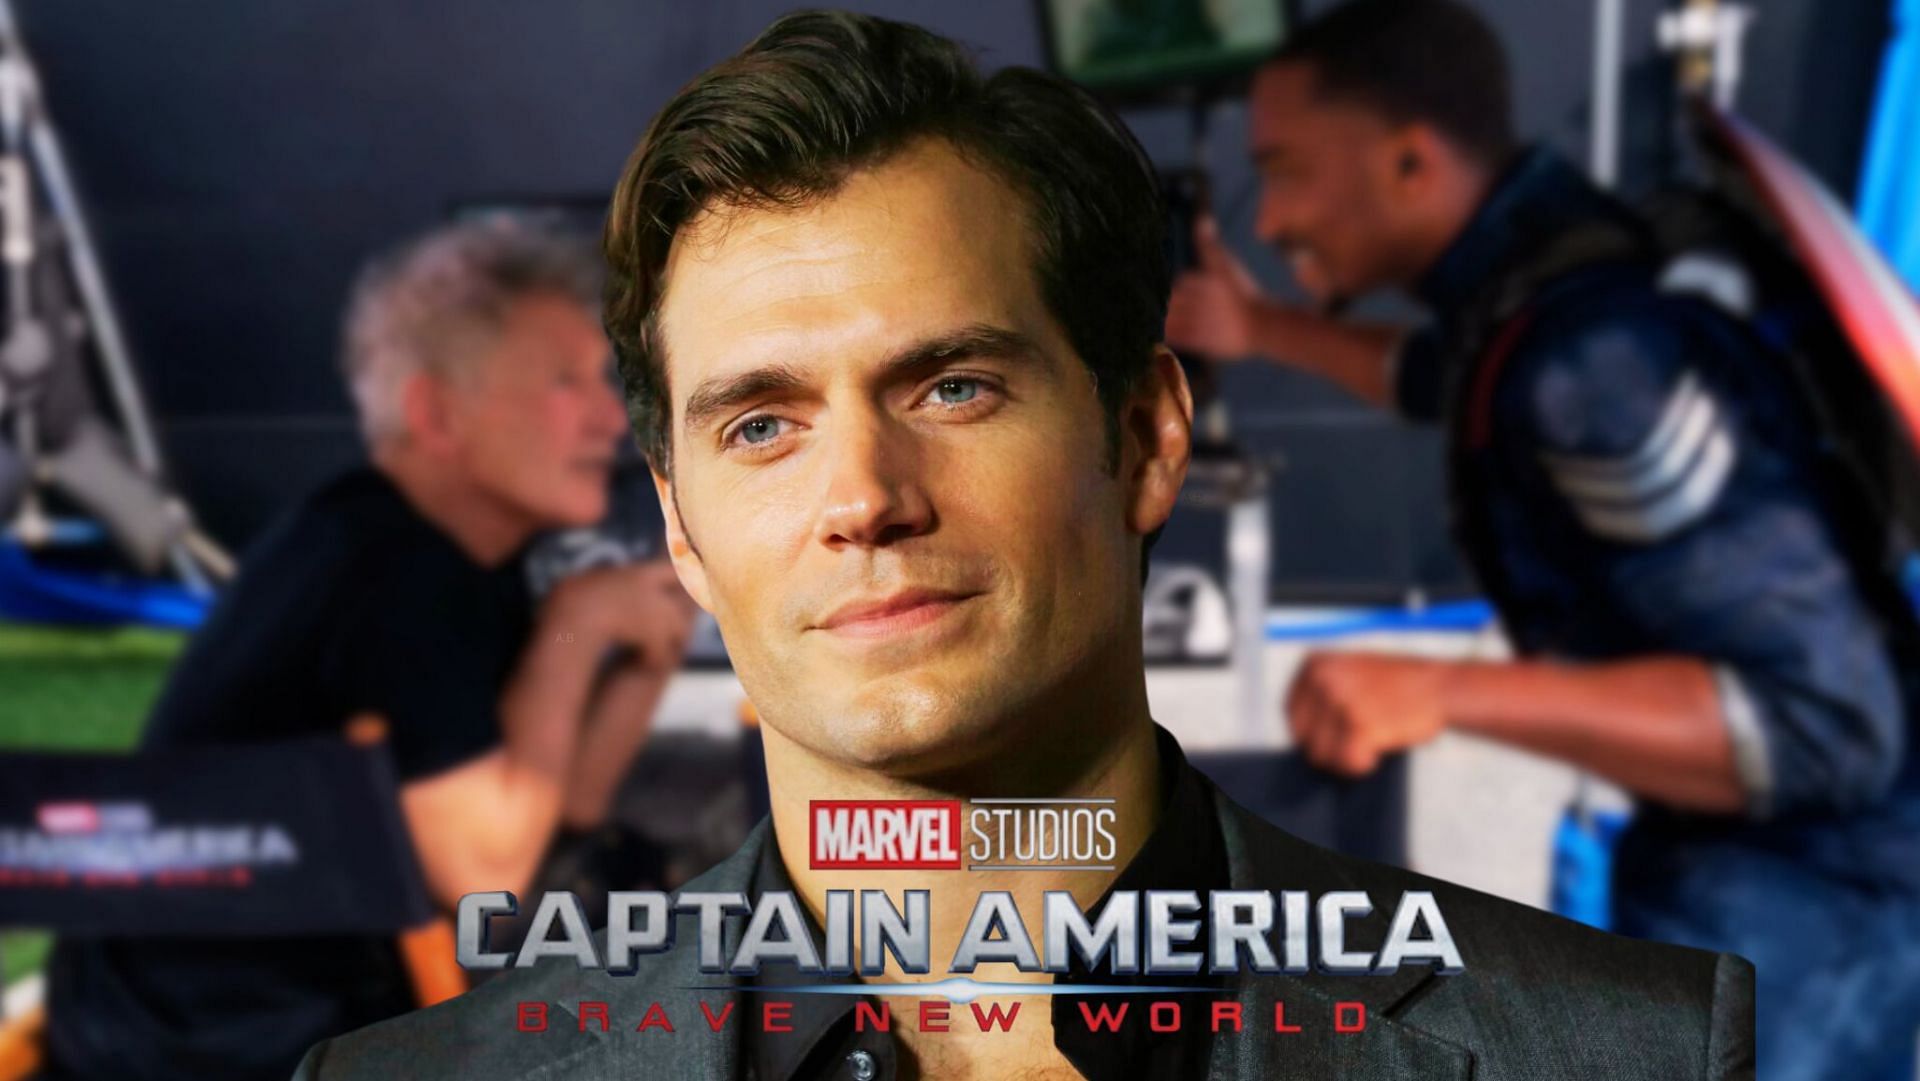 From Metropolis to Great Britain: Henry Cavill